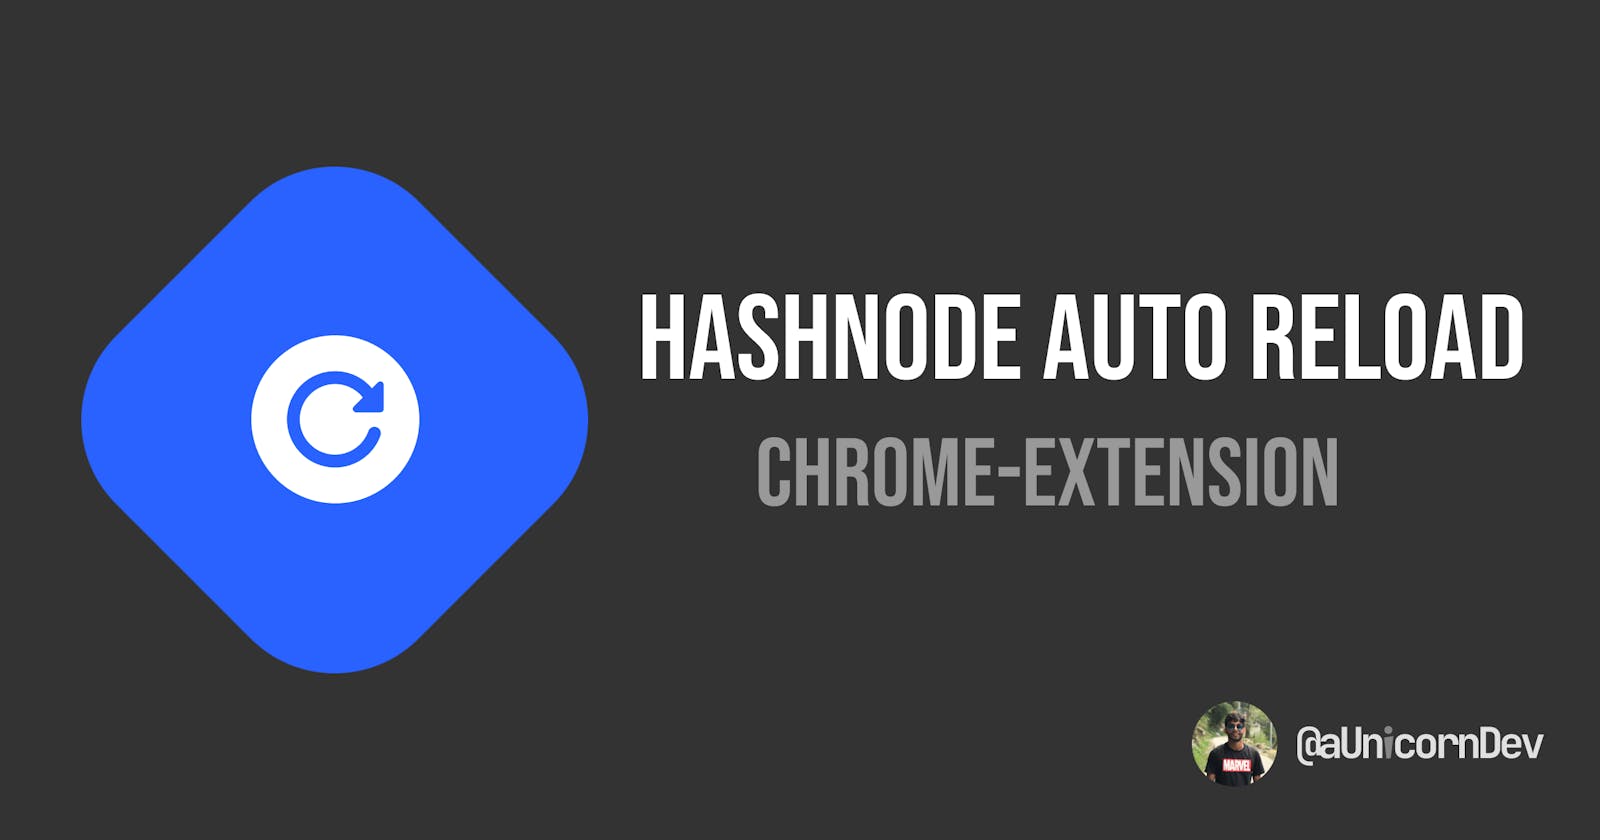 Introducing Hashnode Auto Reload Extension